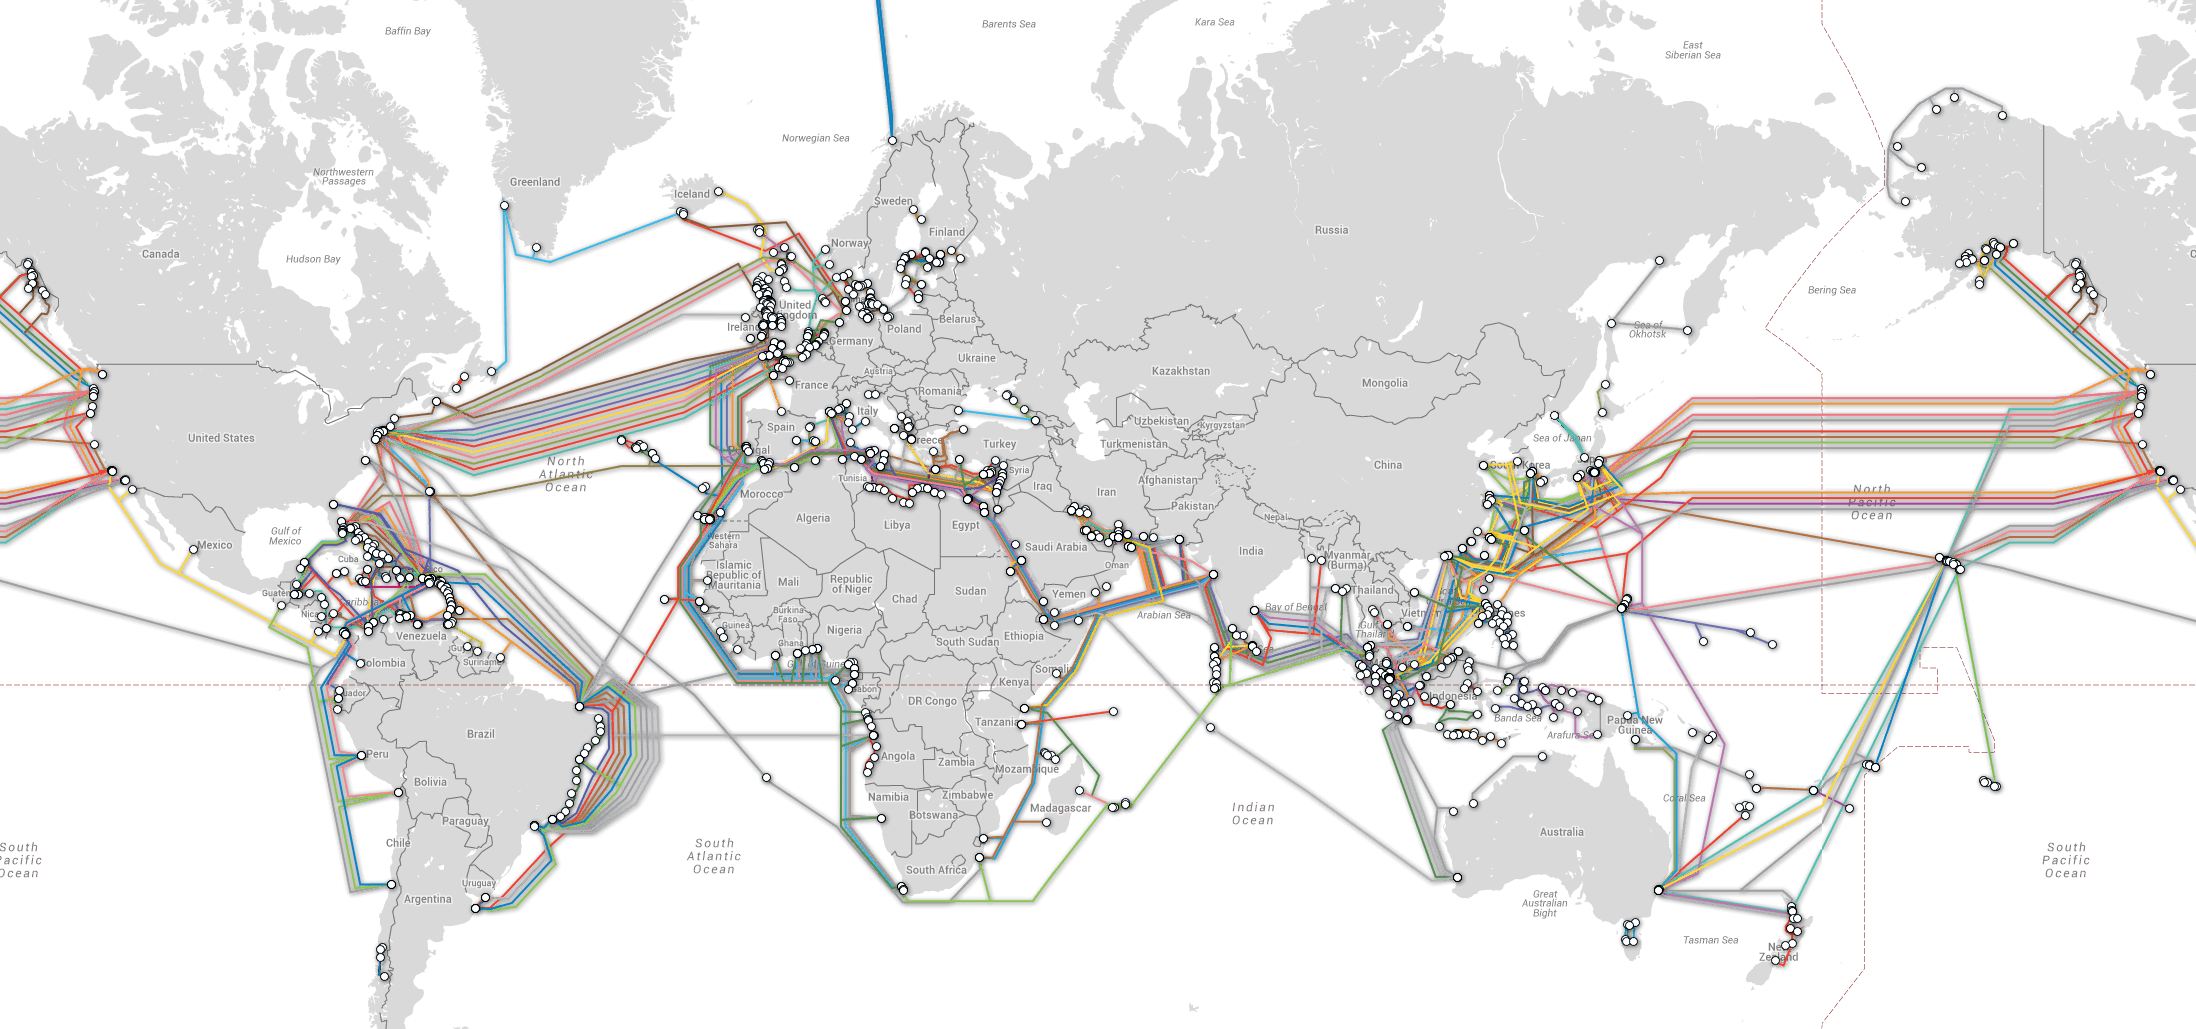 How the Internet works: Submarine fiber, brains in jars, and coaxial cables